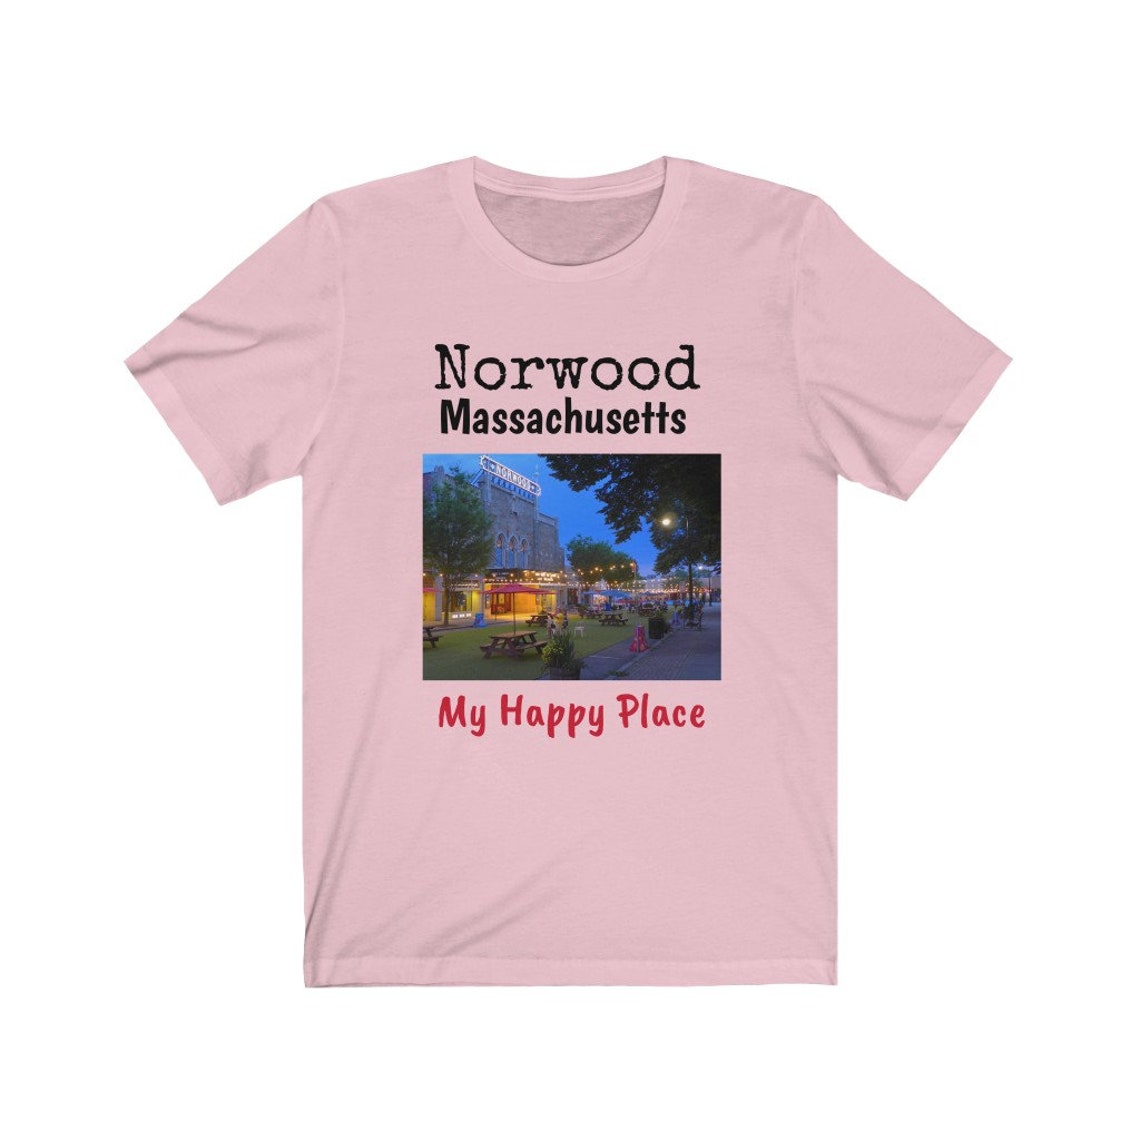 Downtown Norwood, MA T-Shirts for sale...